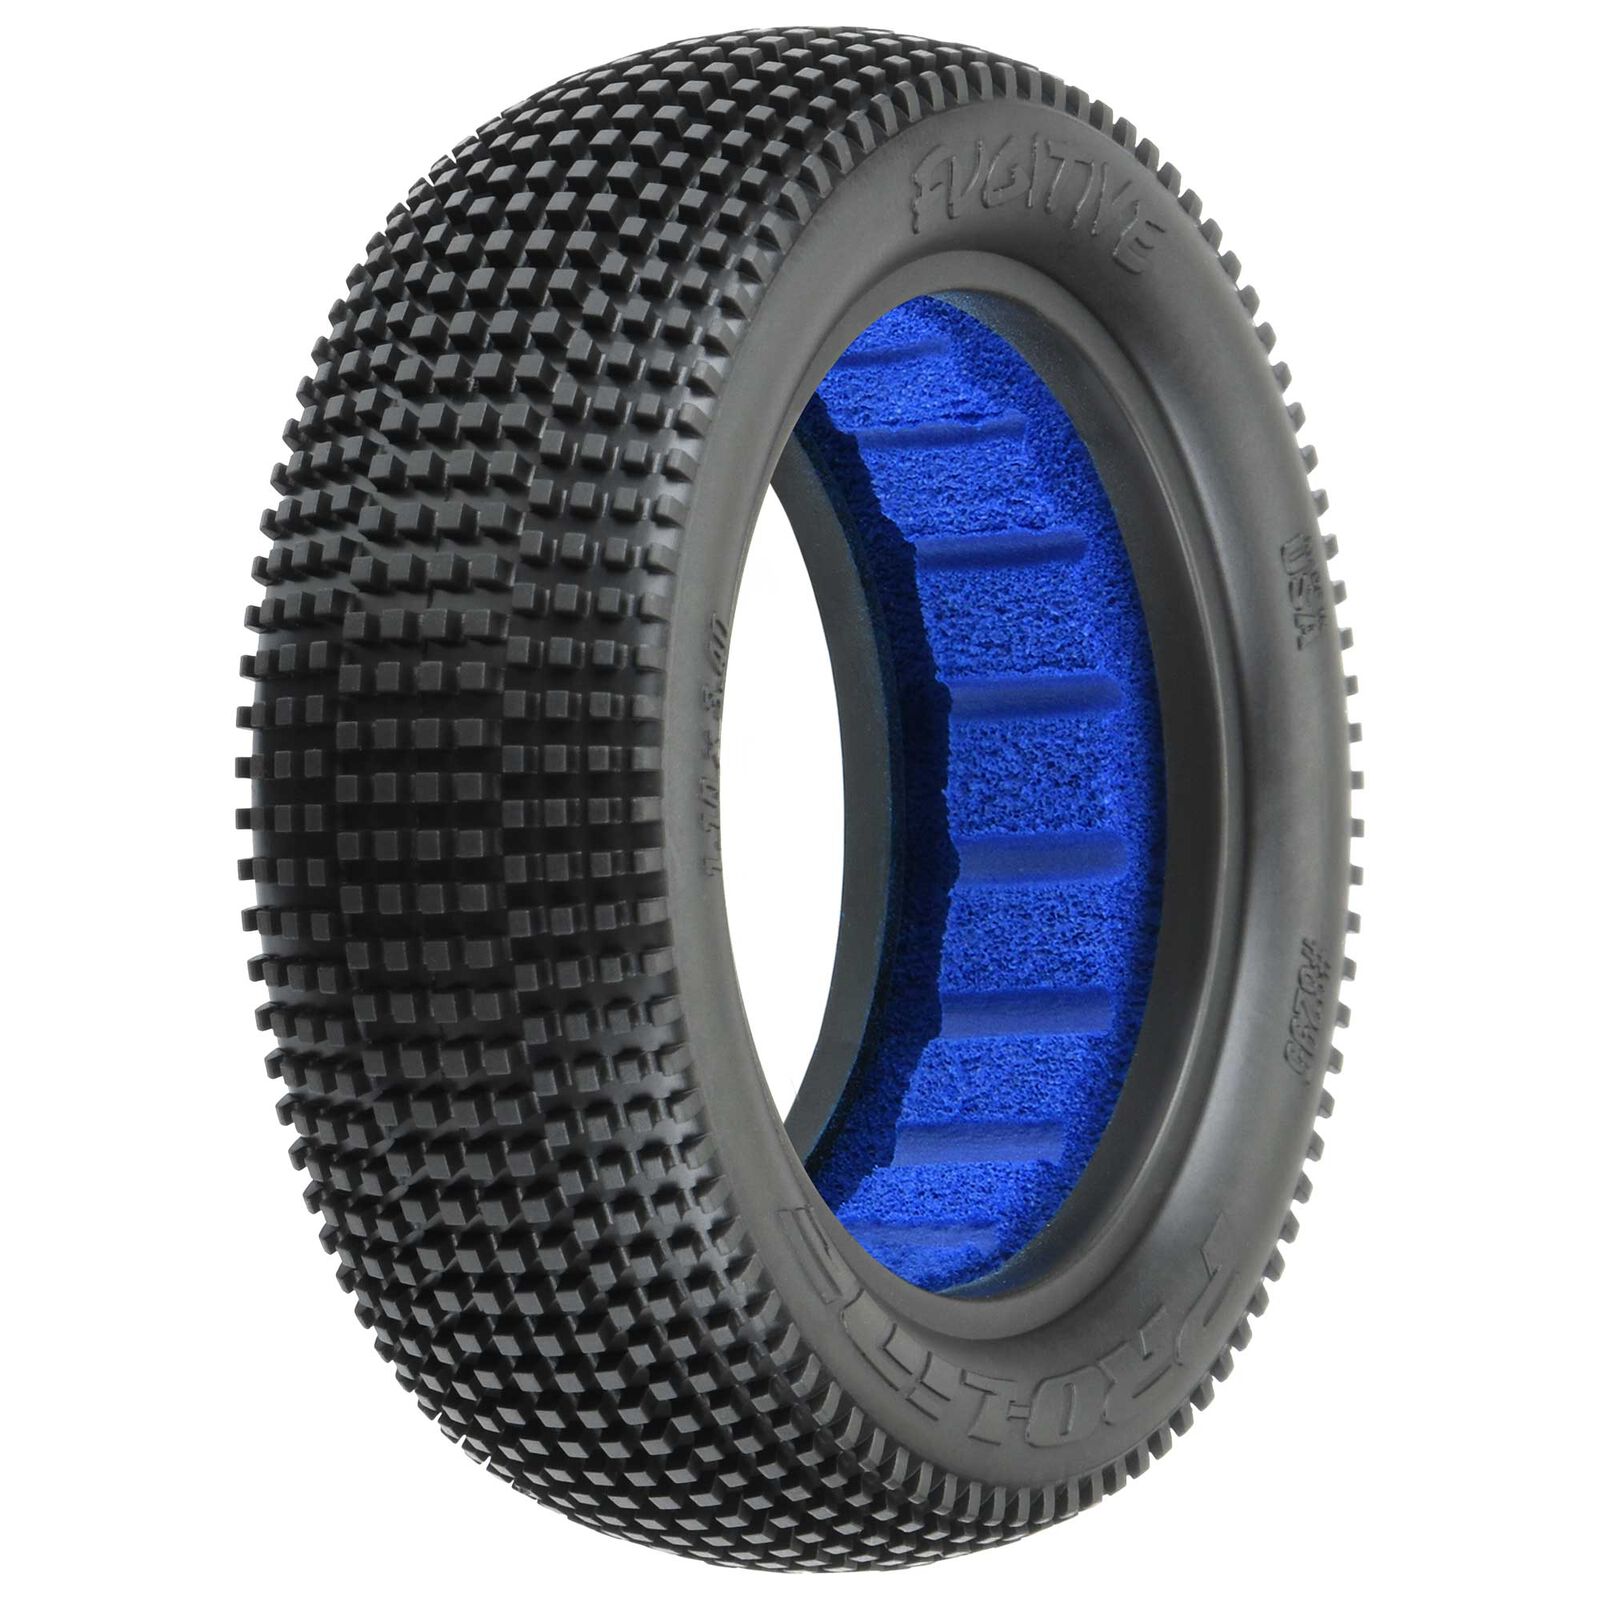 Fugitive 2.2" 2WD S3 Buggy Front Tires (2)